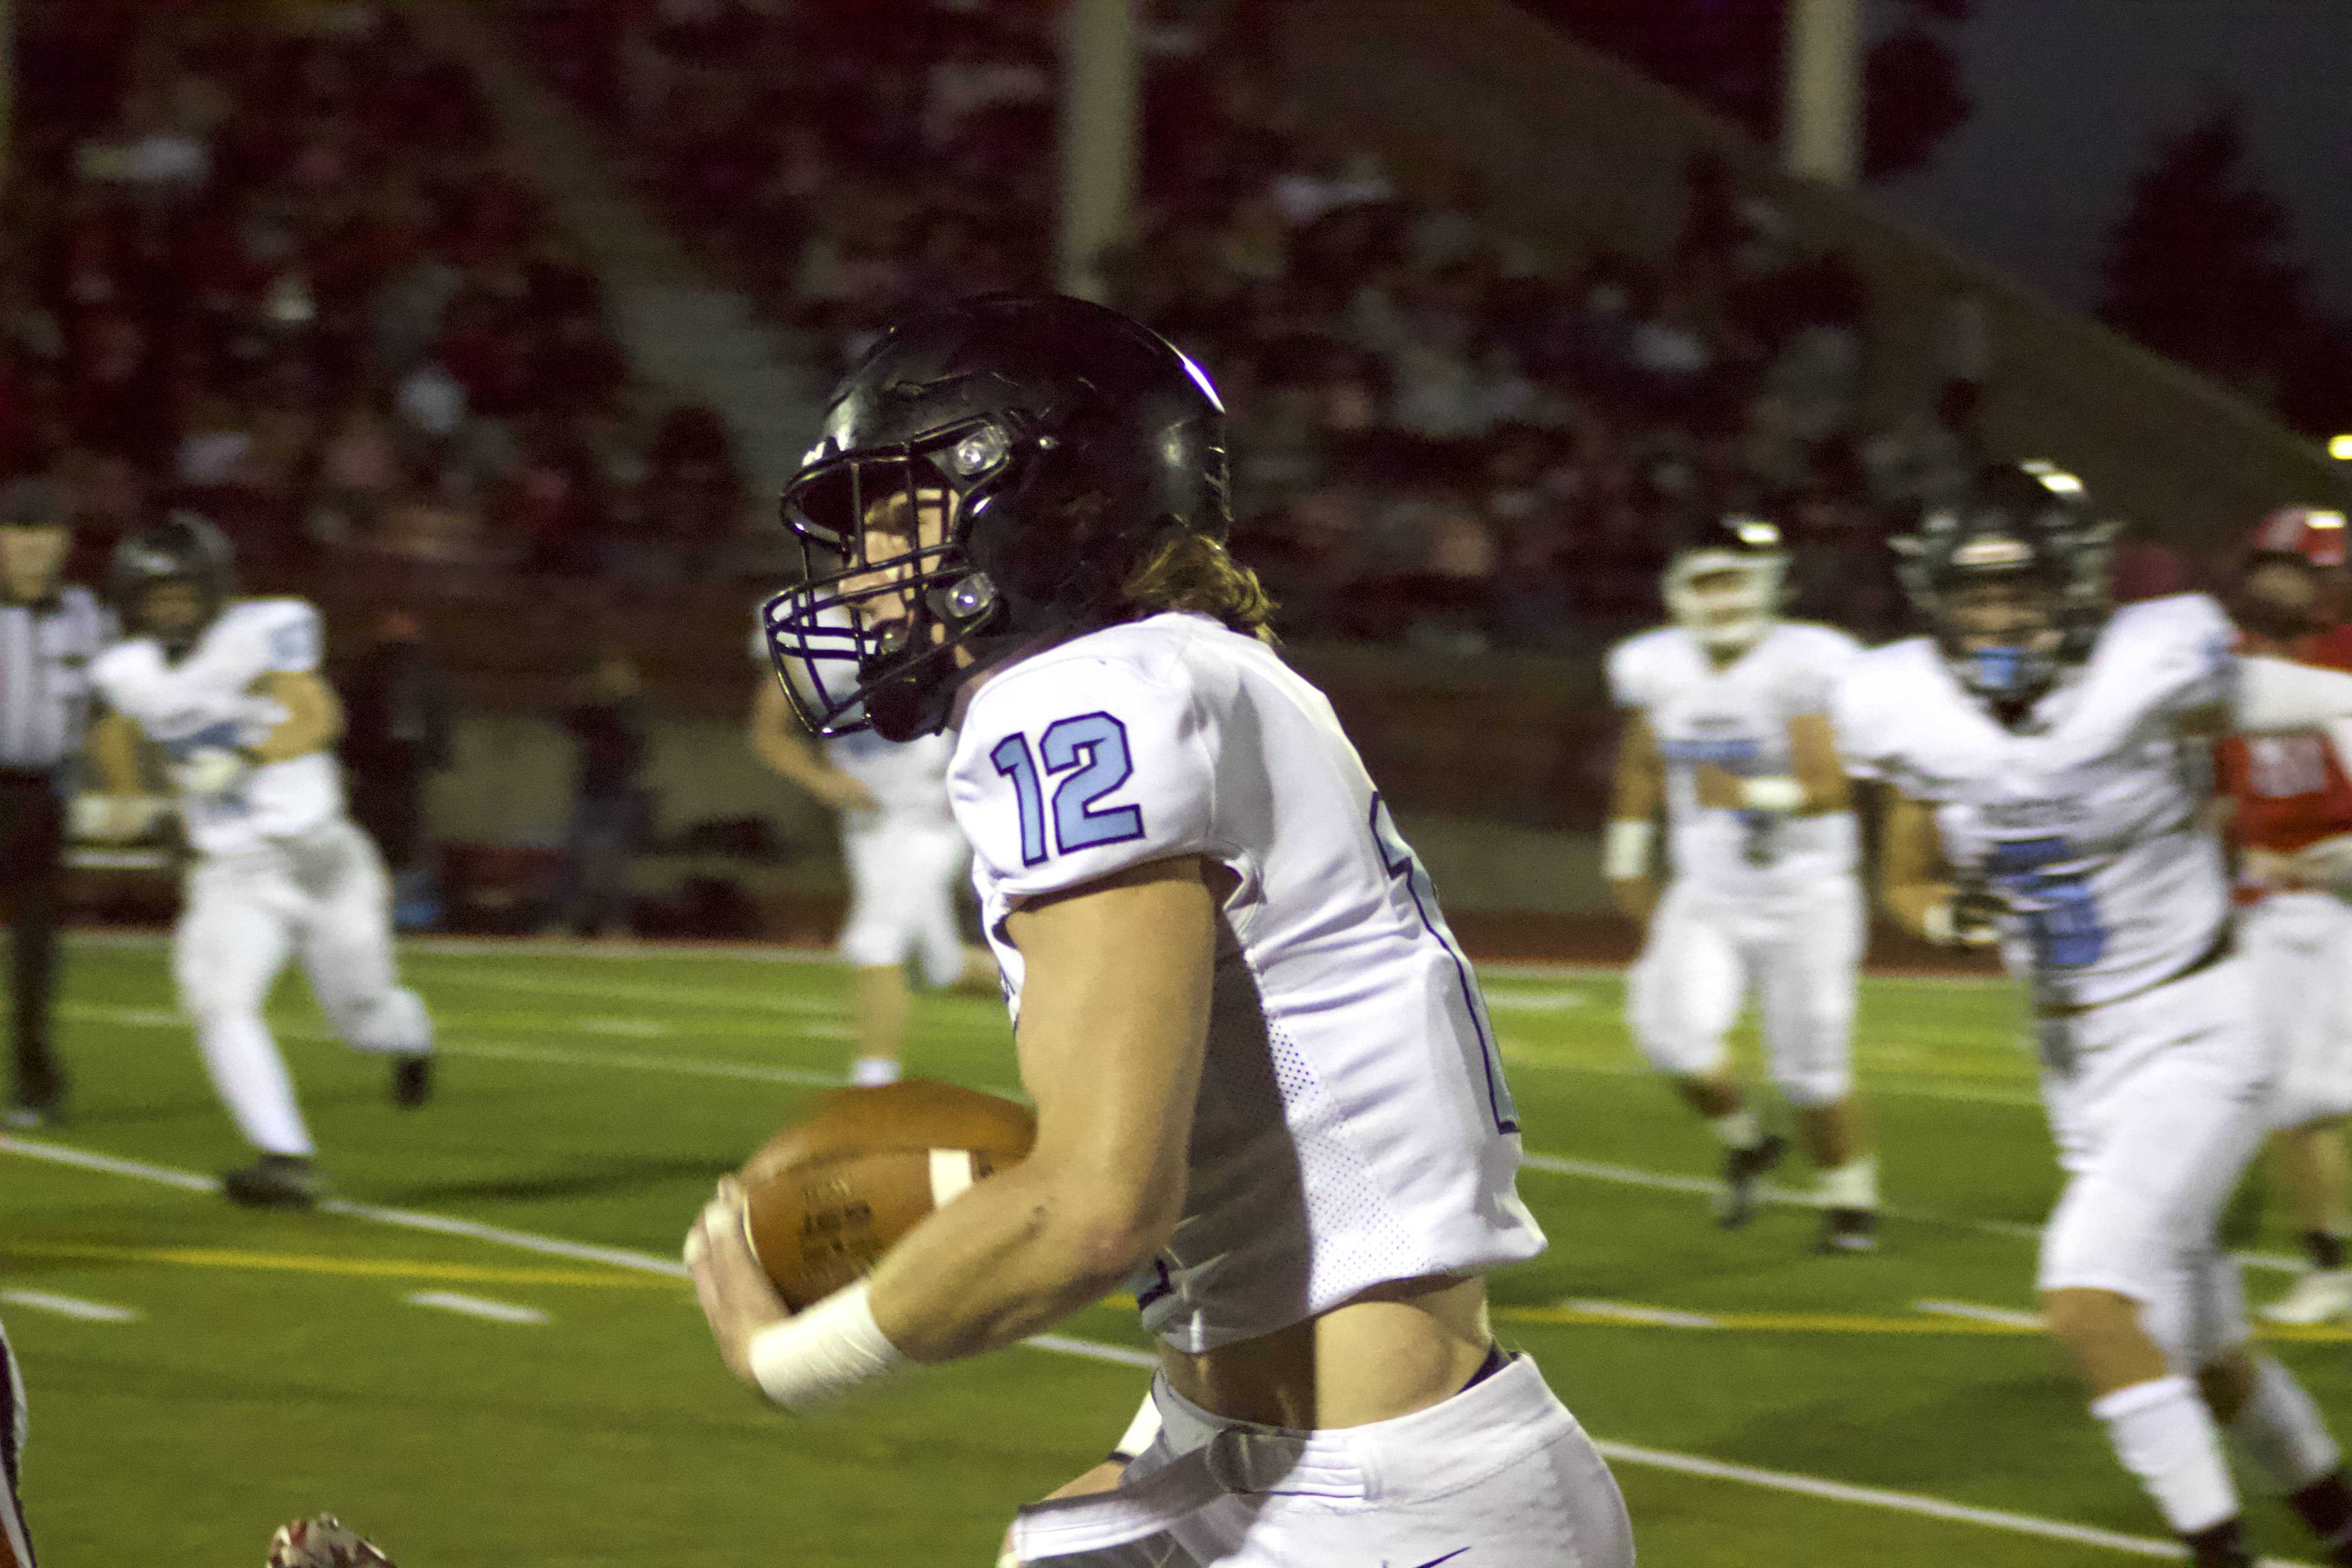 Lakeridge's Jake Reichle ran for 176 yards and two touchdowns Friday. (Photo by Sydney Blem)